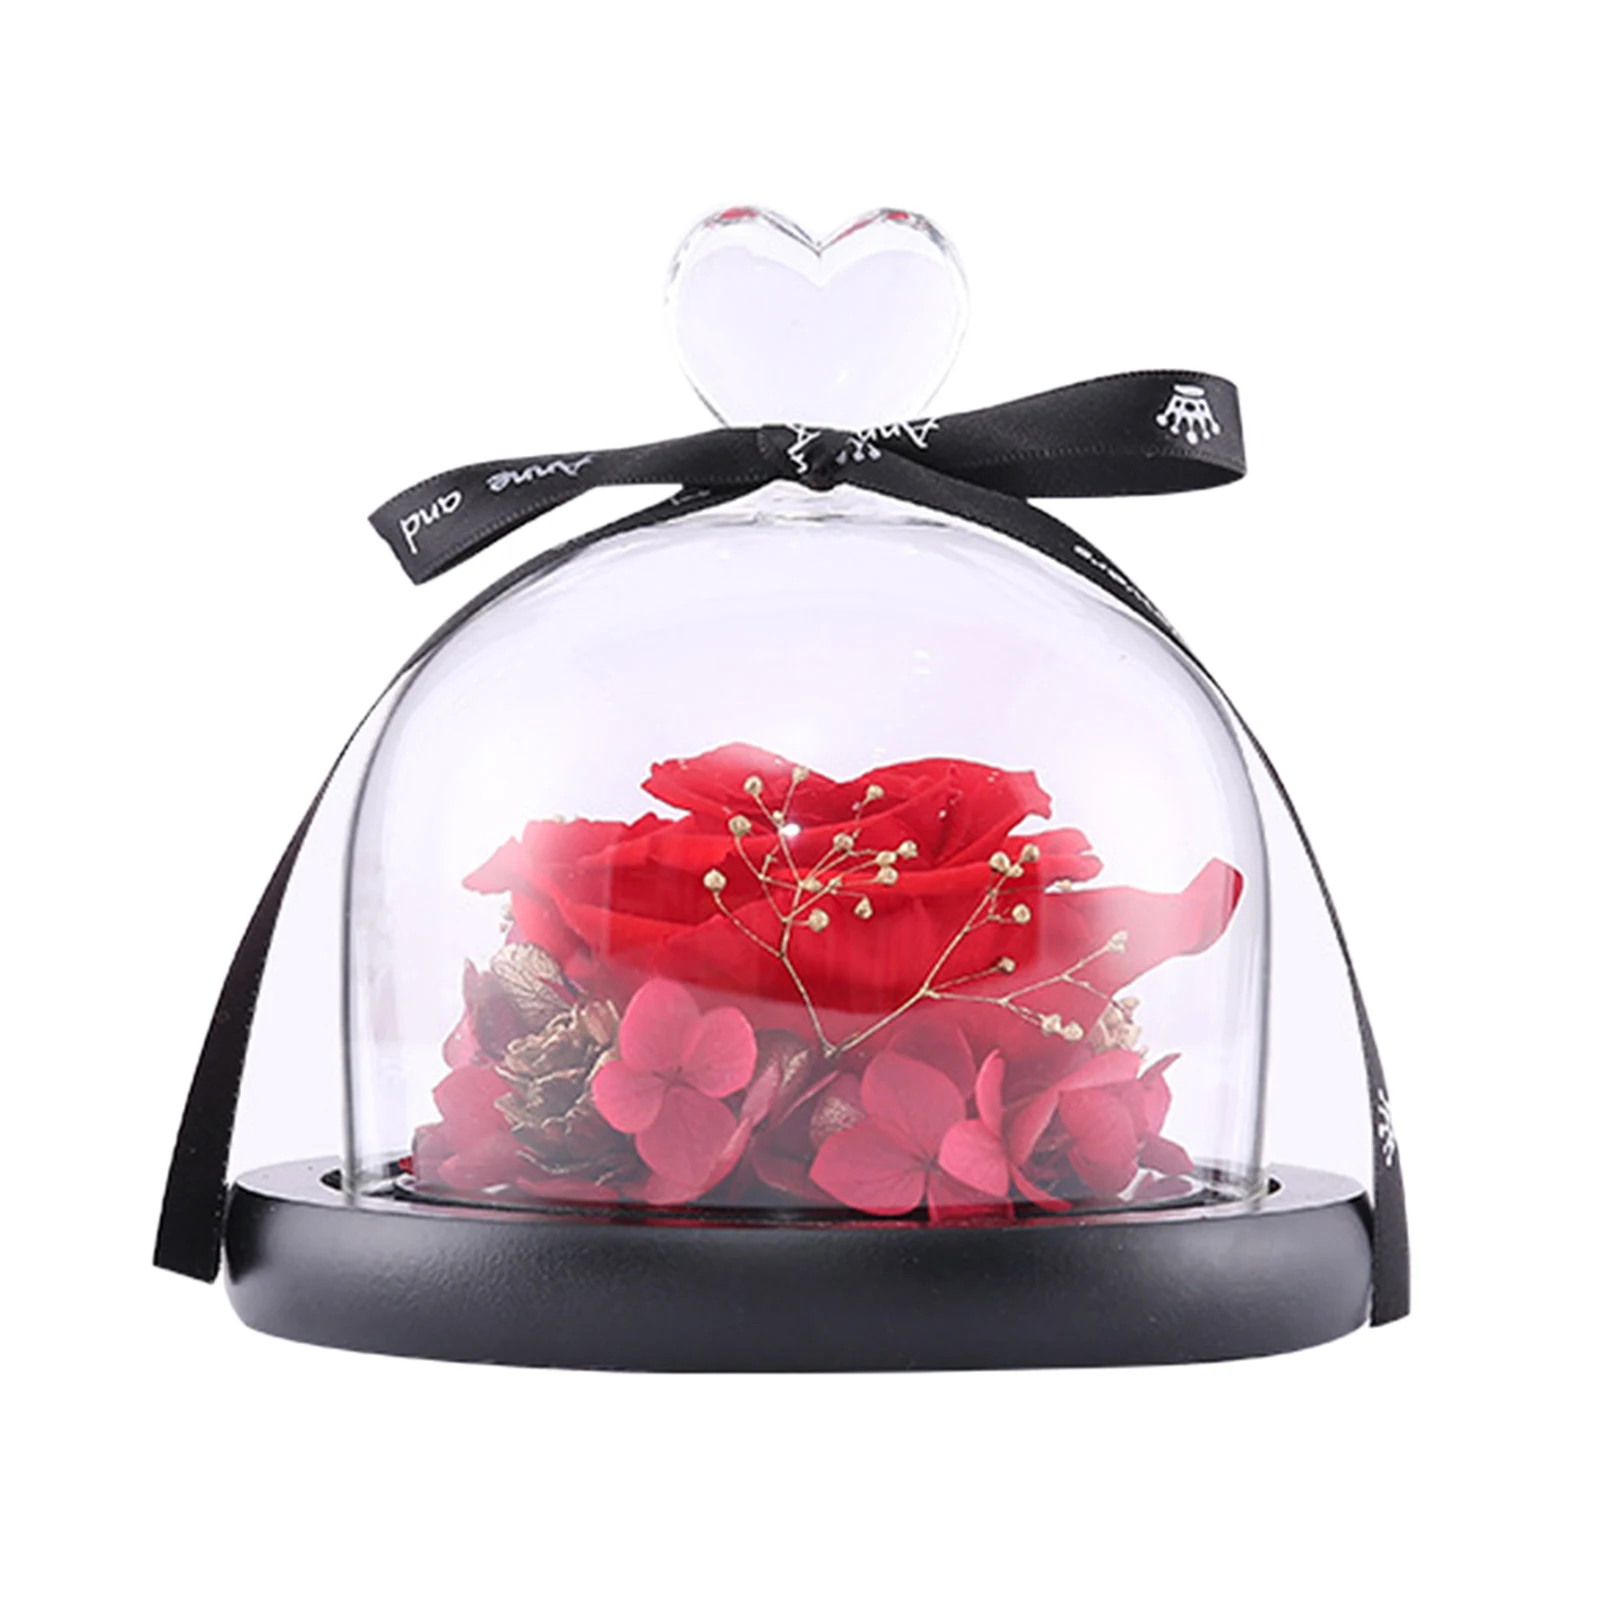 Preserved Rose Fresh Glass Dome Wedding Gift Present Home Decor Centerpieces